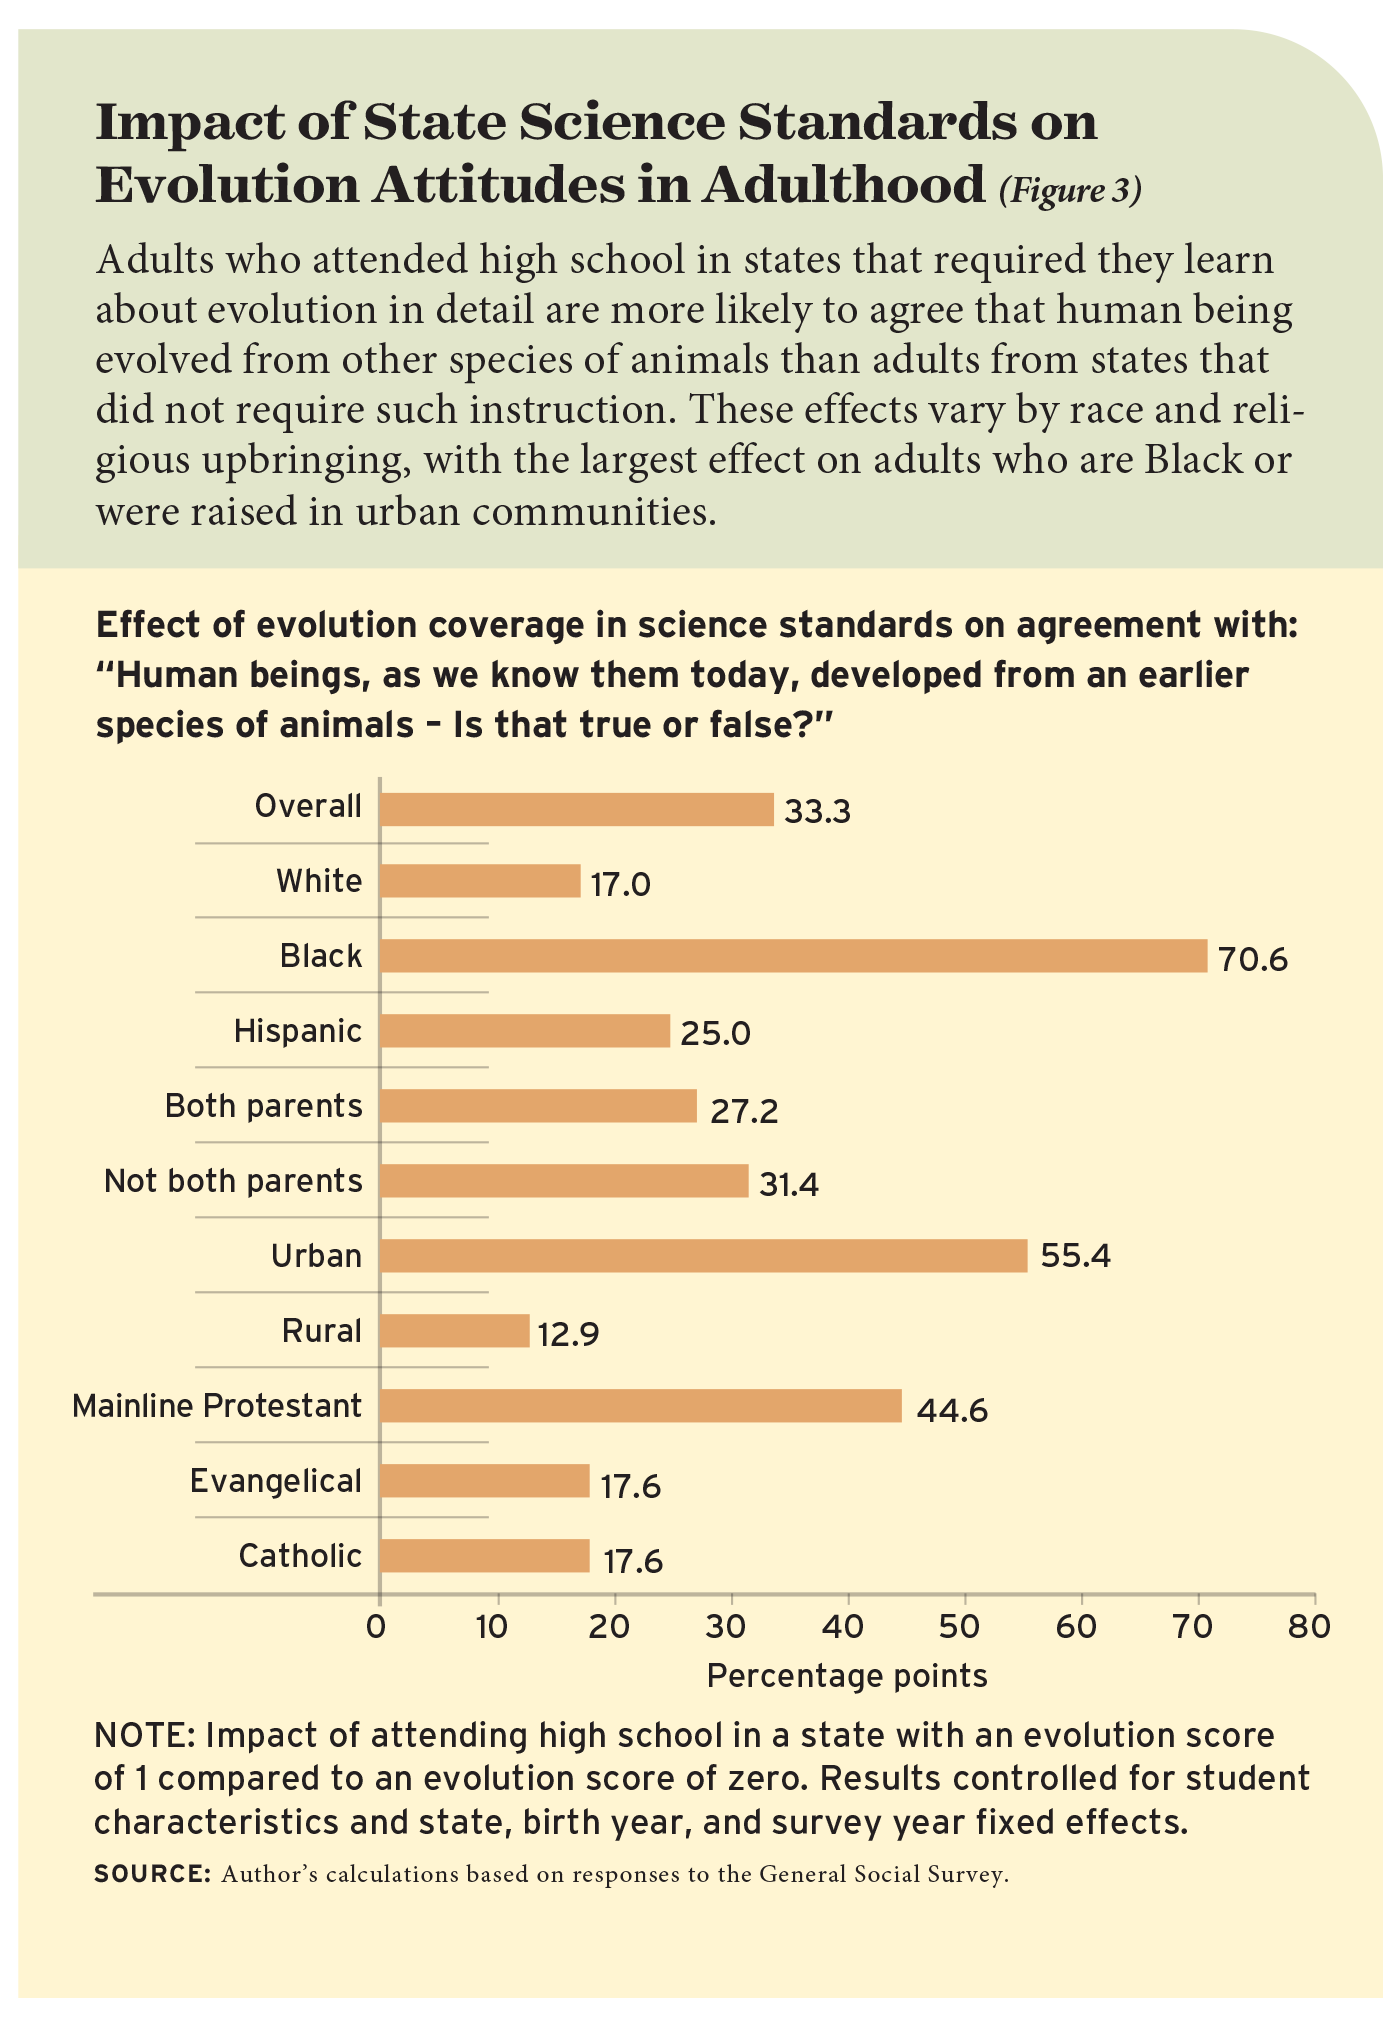 Impact of State Science Standards on Evolution Attitudes in Adulthood